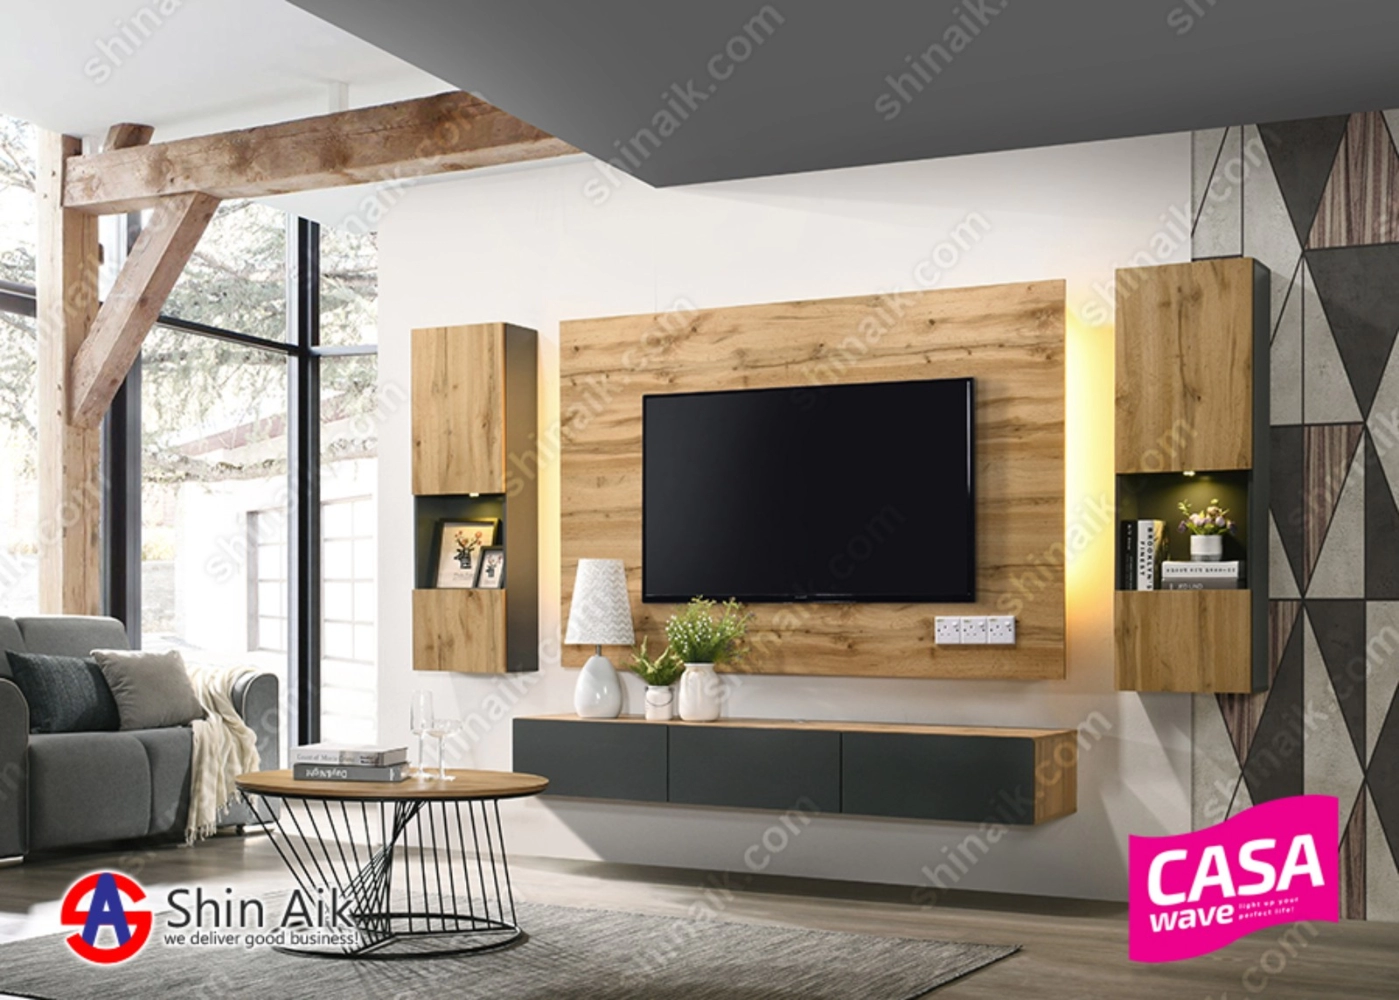 VARIO 02 (8.5'ft) Cedar & Grey Two-Tone Modern Feature Wall-Mounted TV Cabinet